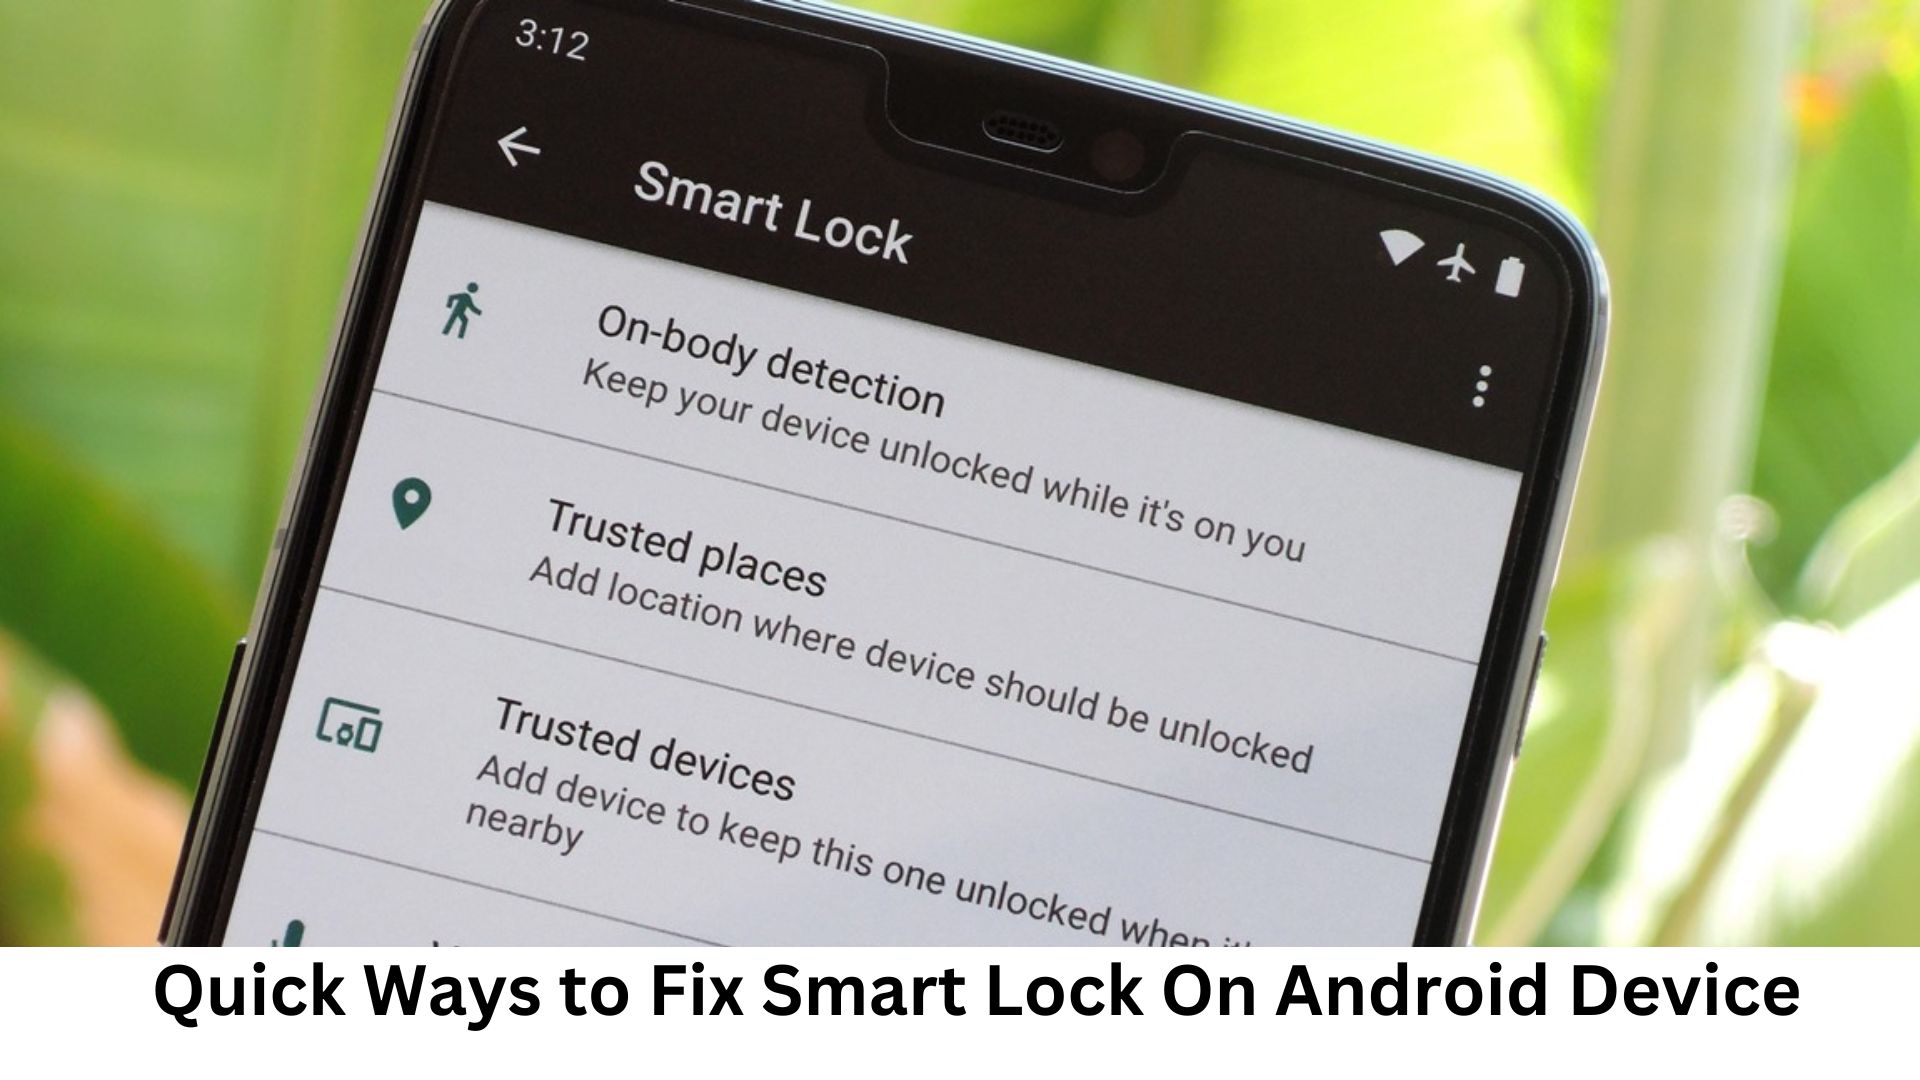 Troubleshooting Guide: Fixing Android Smart Lock Not Working Issues